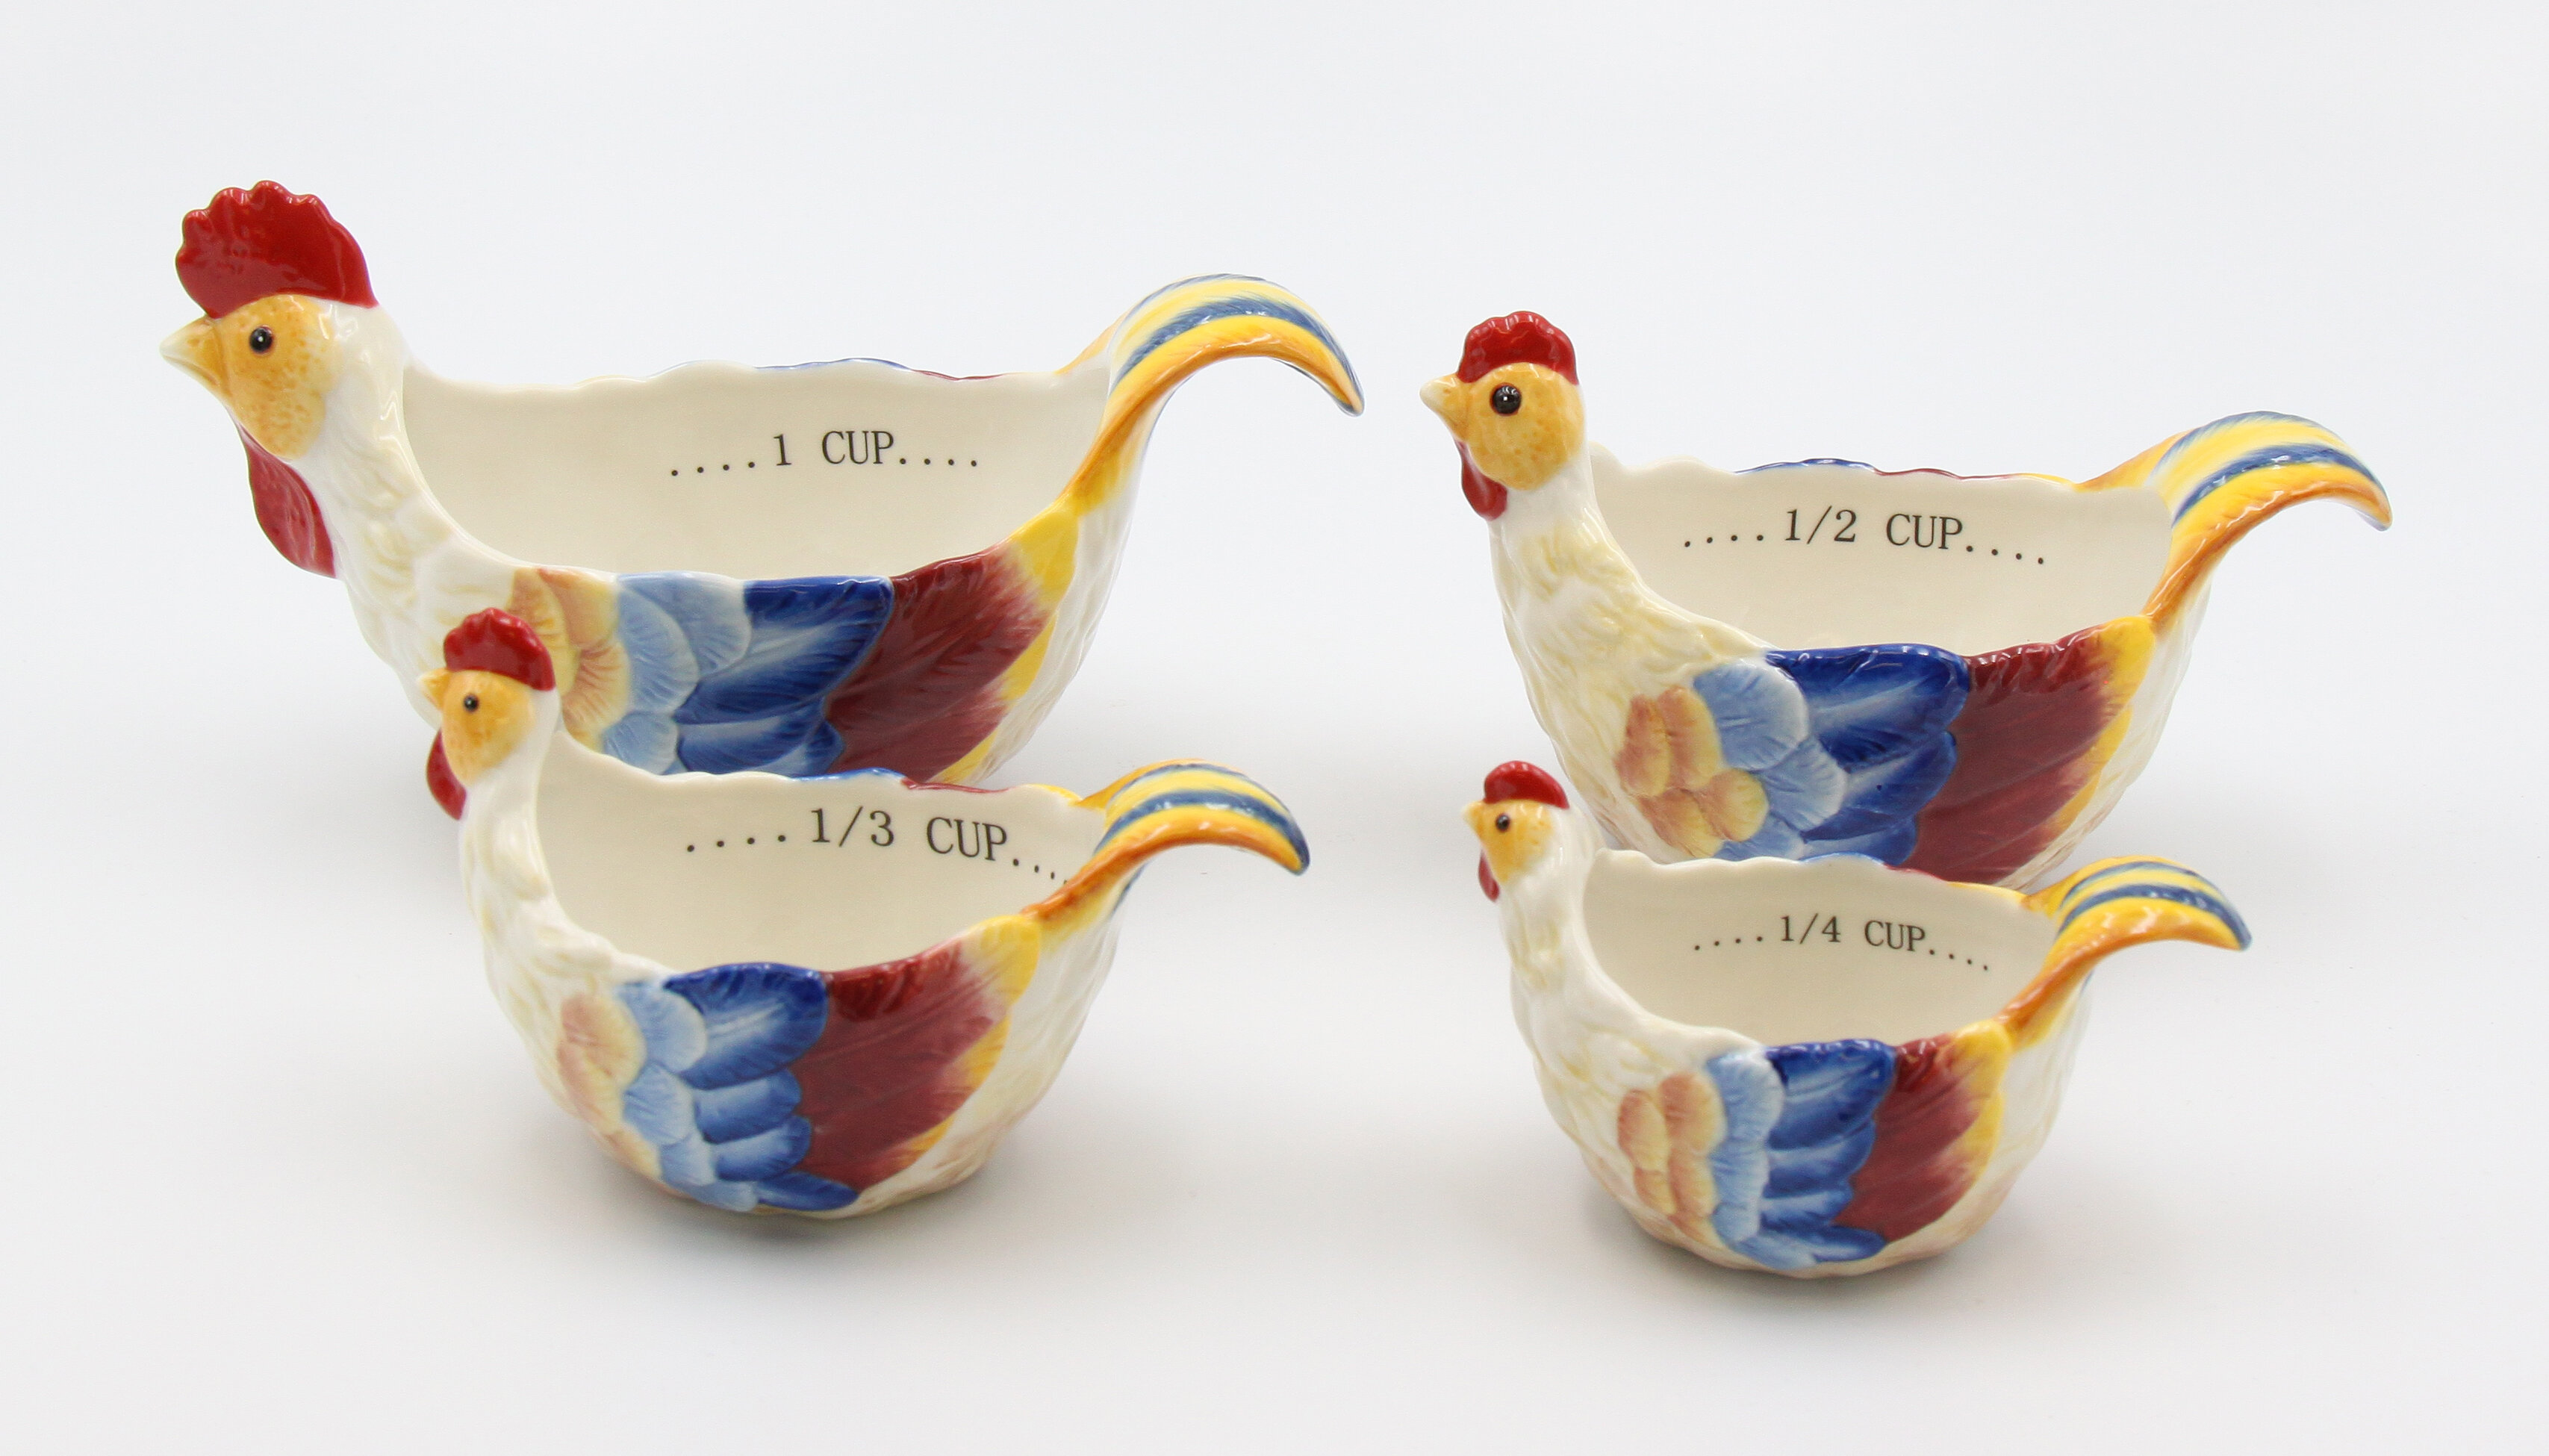  Cosmos Gifts 31983 Blue Rooster Measuring Cups : Home & Kitchen